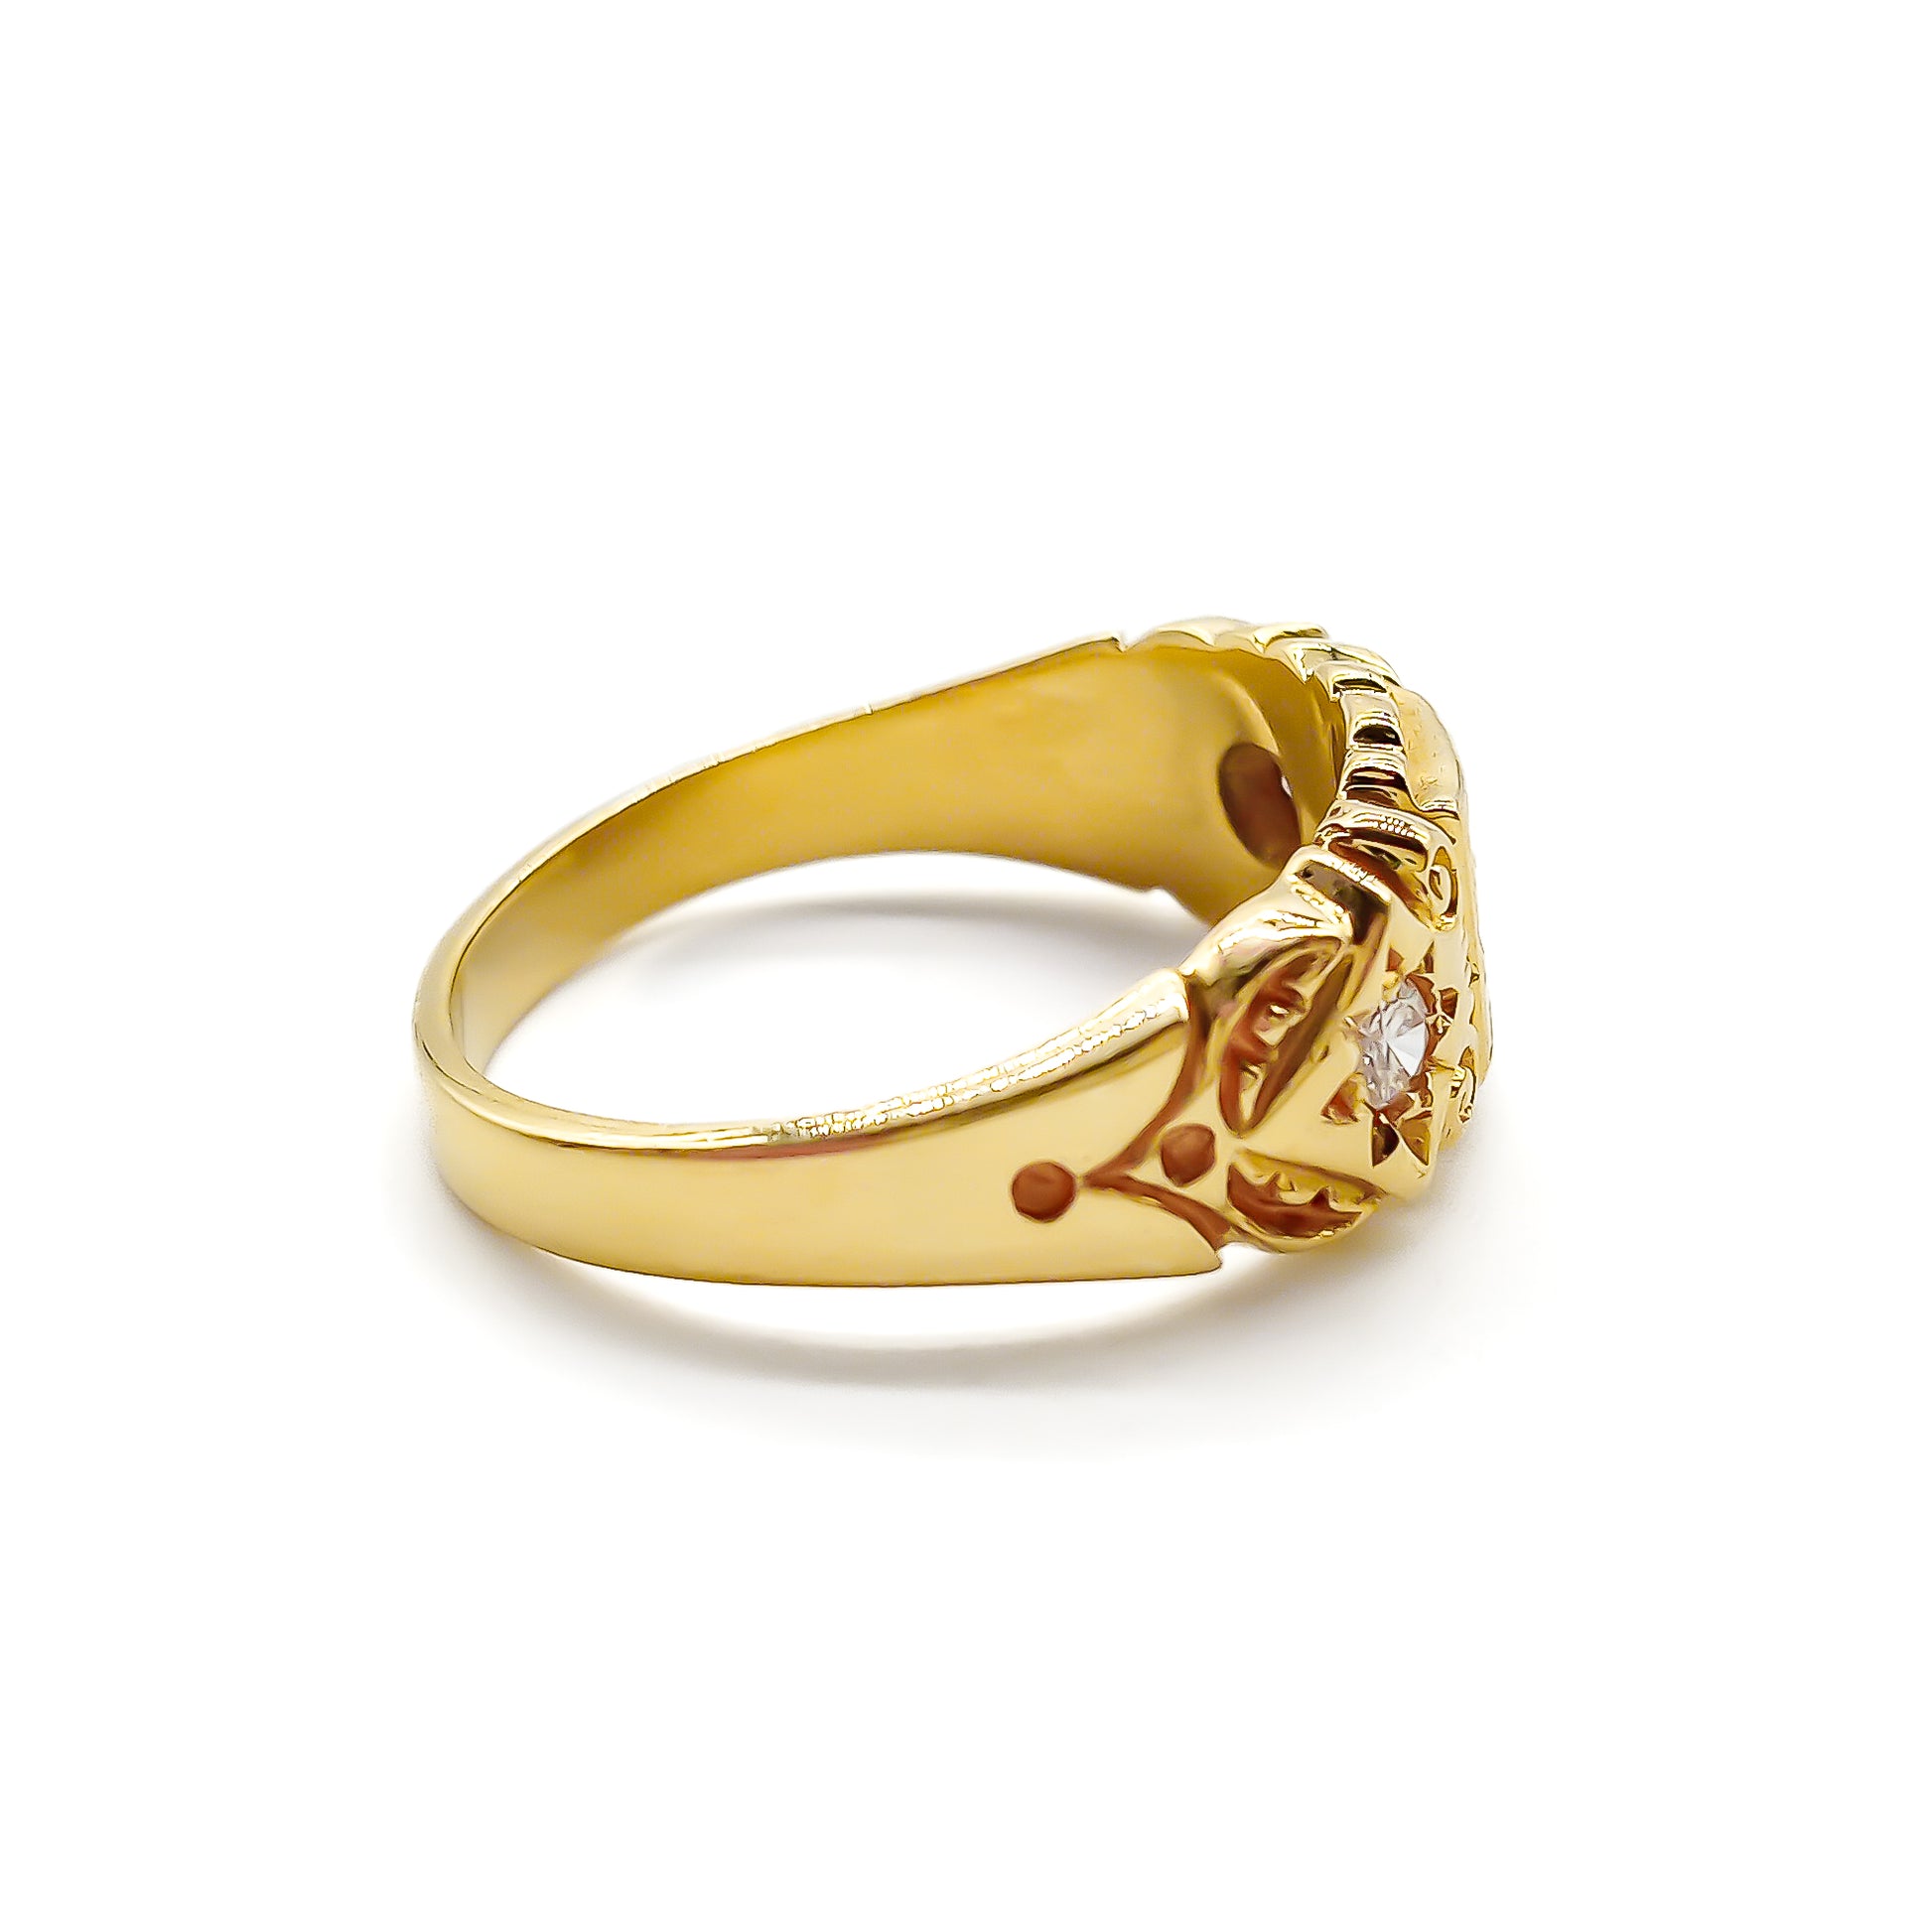 Classic Edwardian 18ct yellow gold trilogy diamond ring with beautiful engraving.